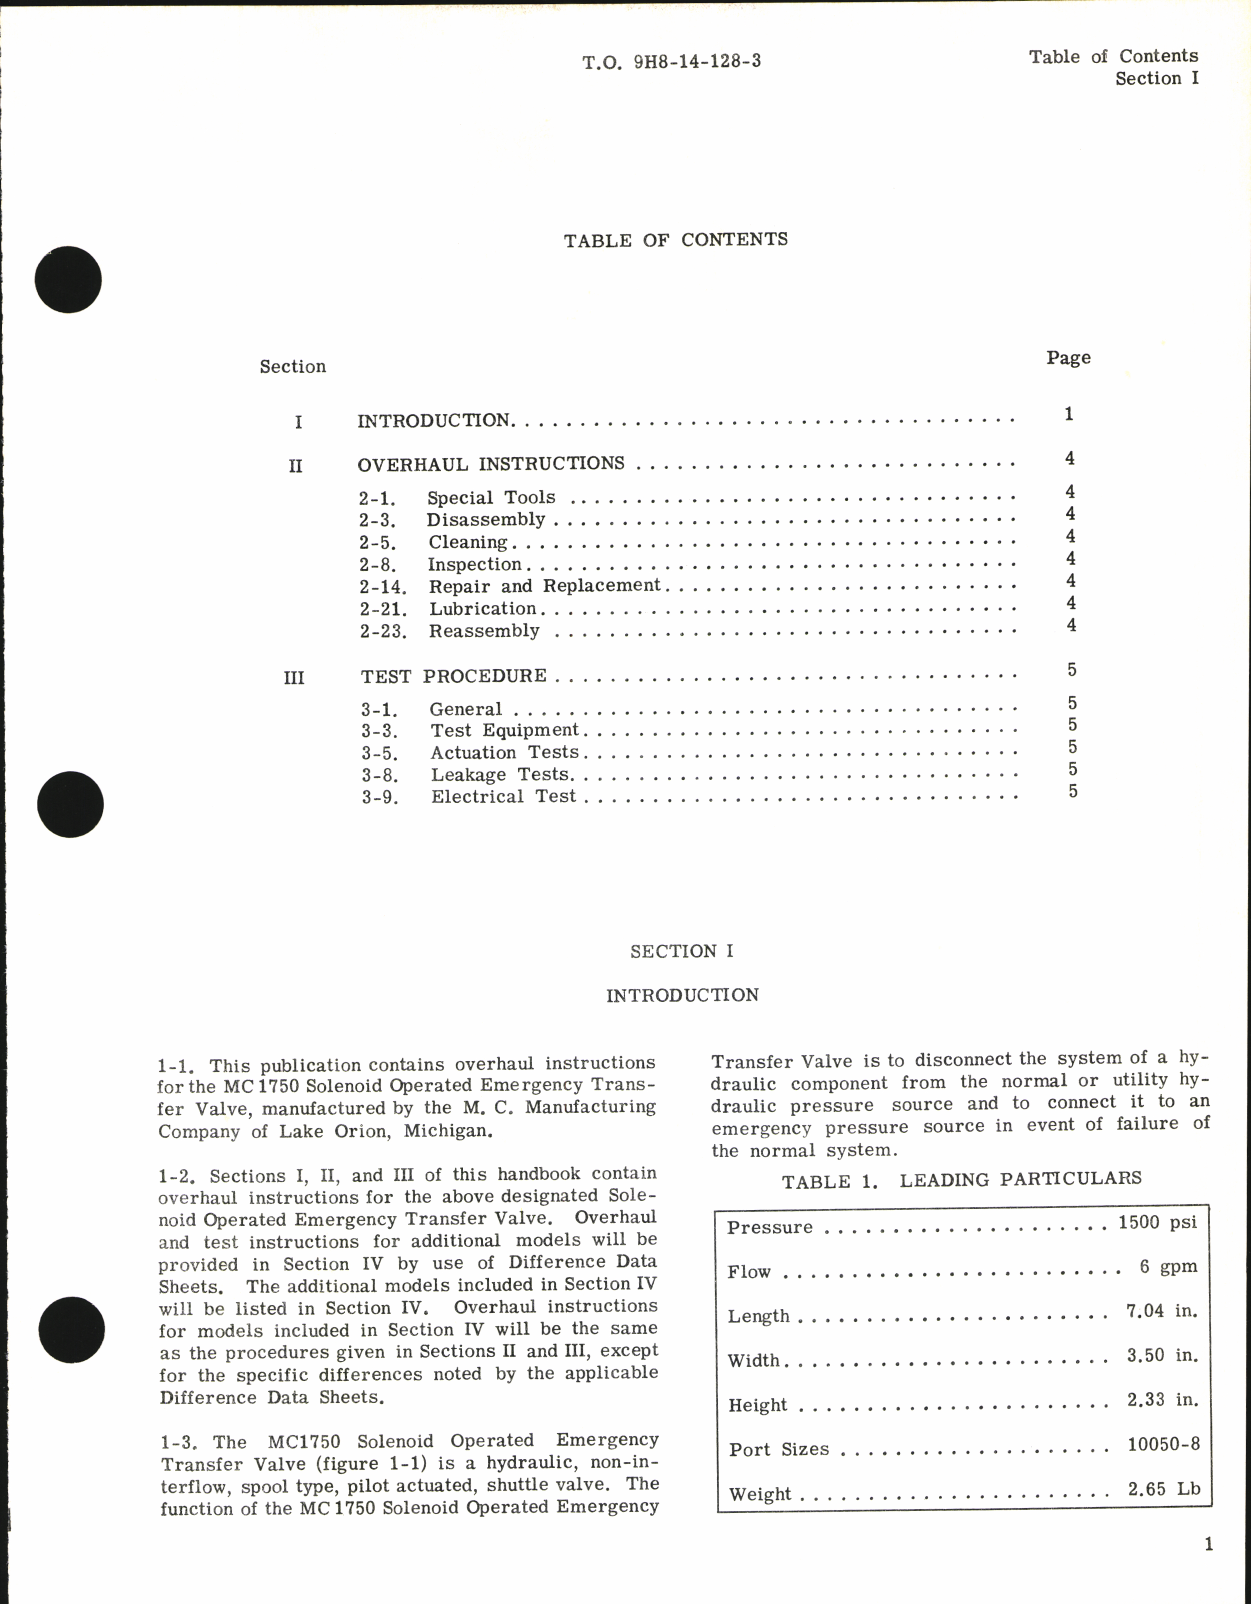 Sample page 3 from AirCorps Library document: Handbook of Instructions for Solenoid Operated Emergency Transfer Valve Part No. MC 1750